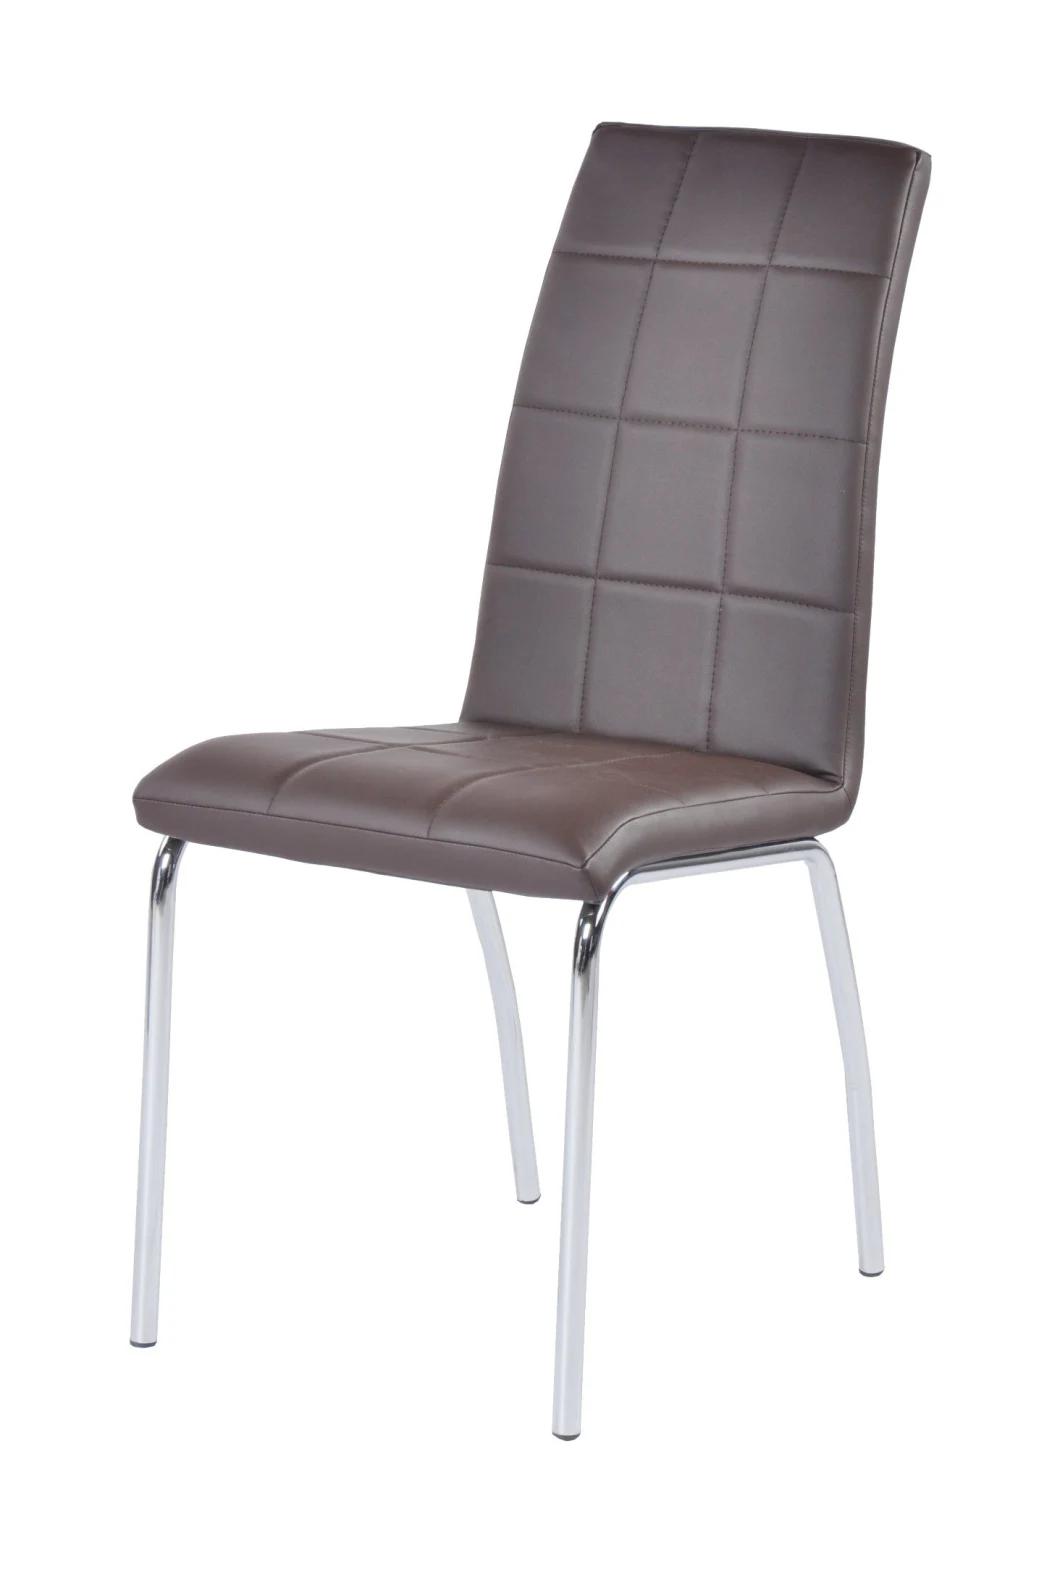 Modern Home Office Restaurant Furniture High-Back PU Seat Dining Chairs